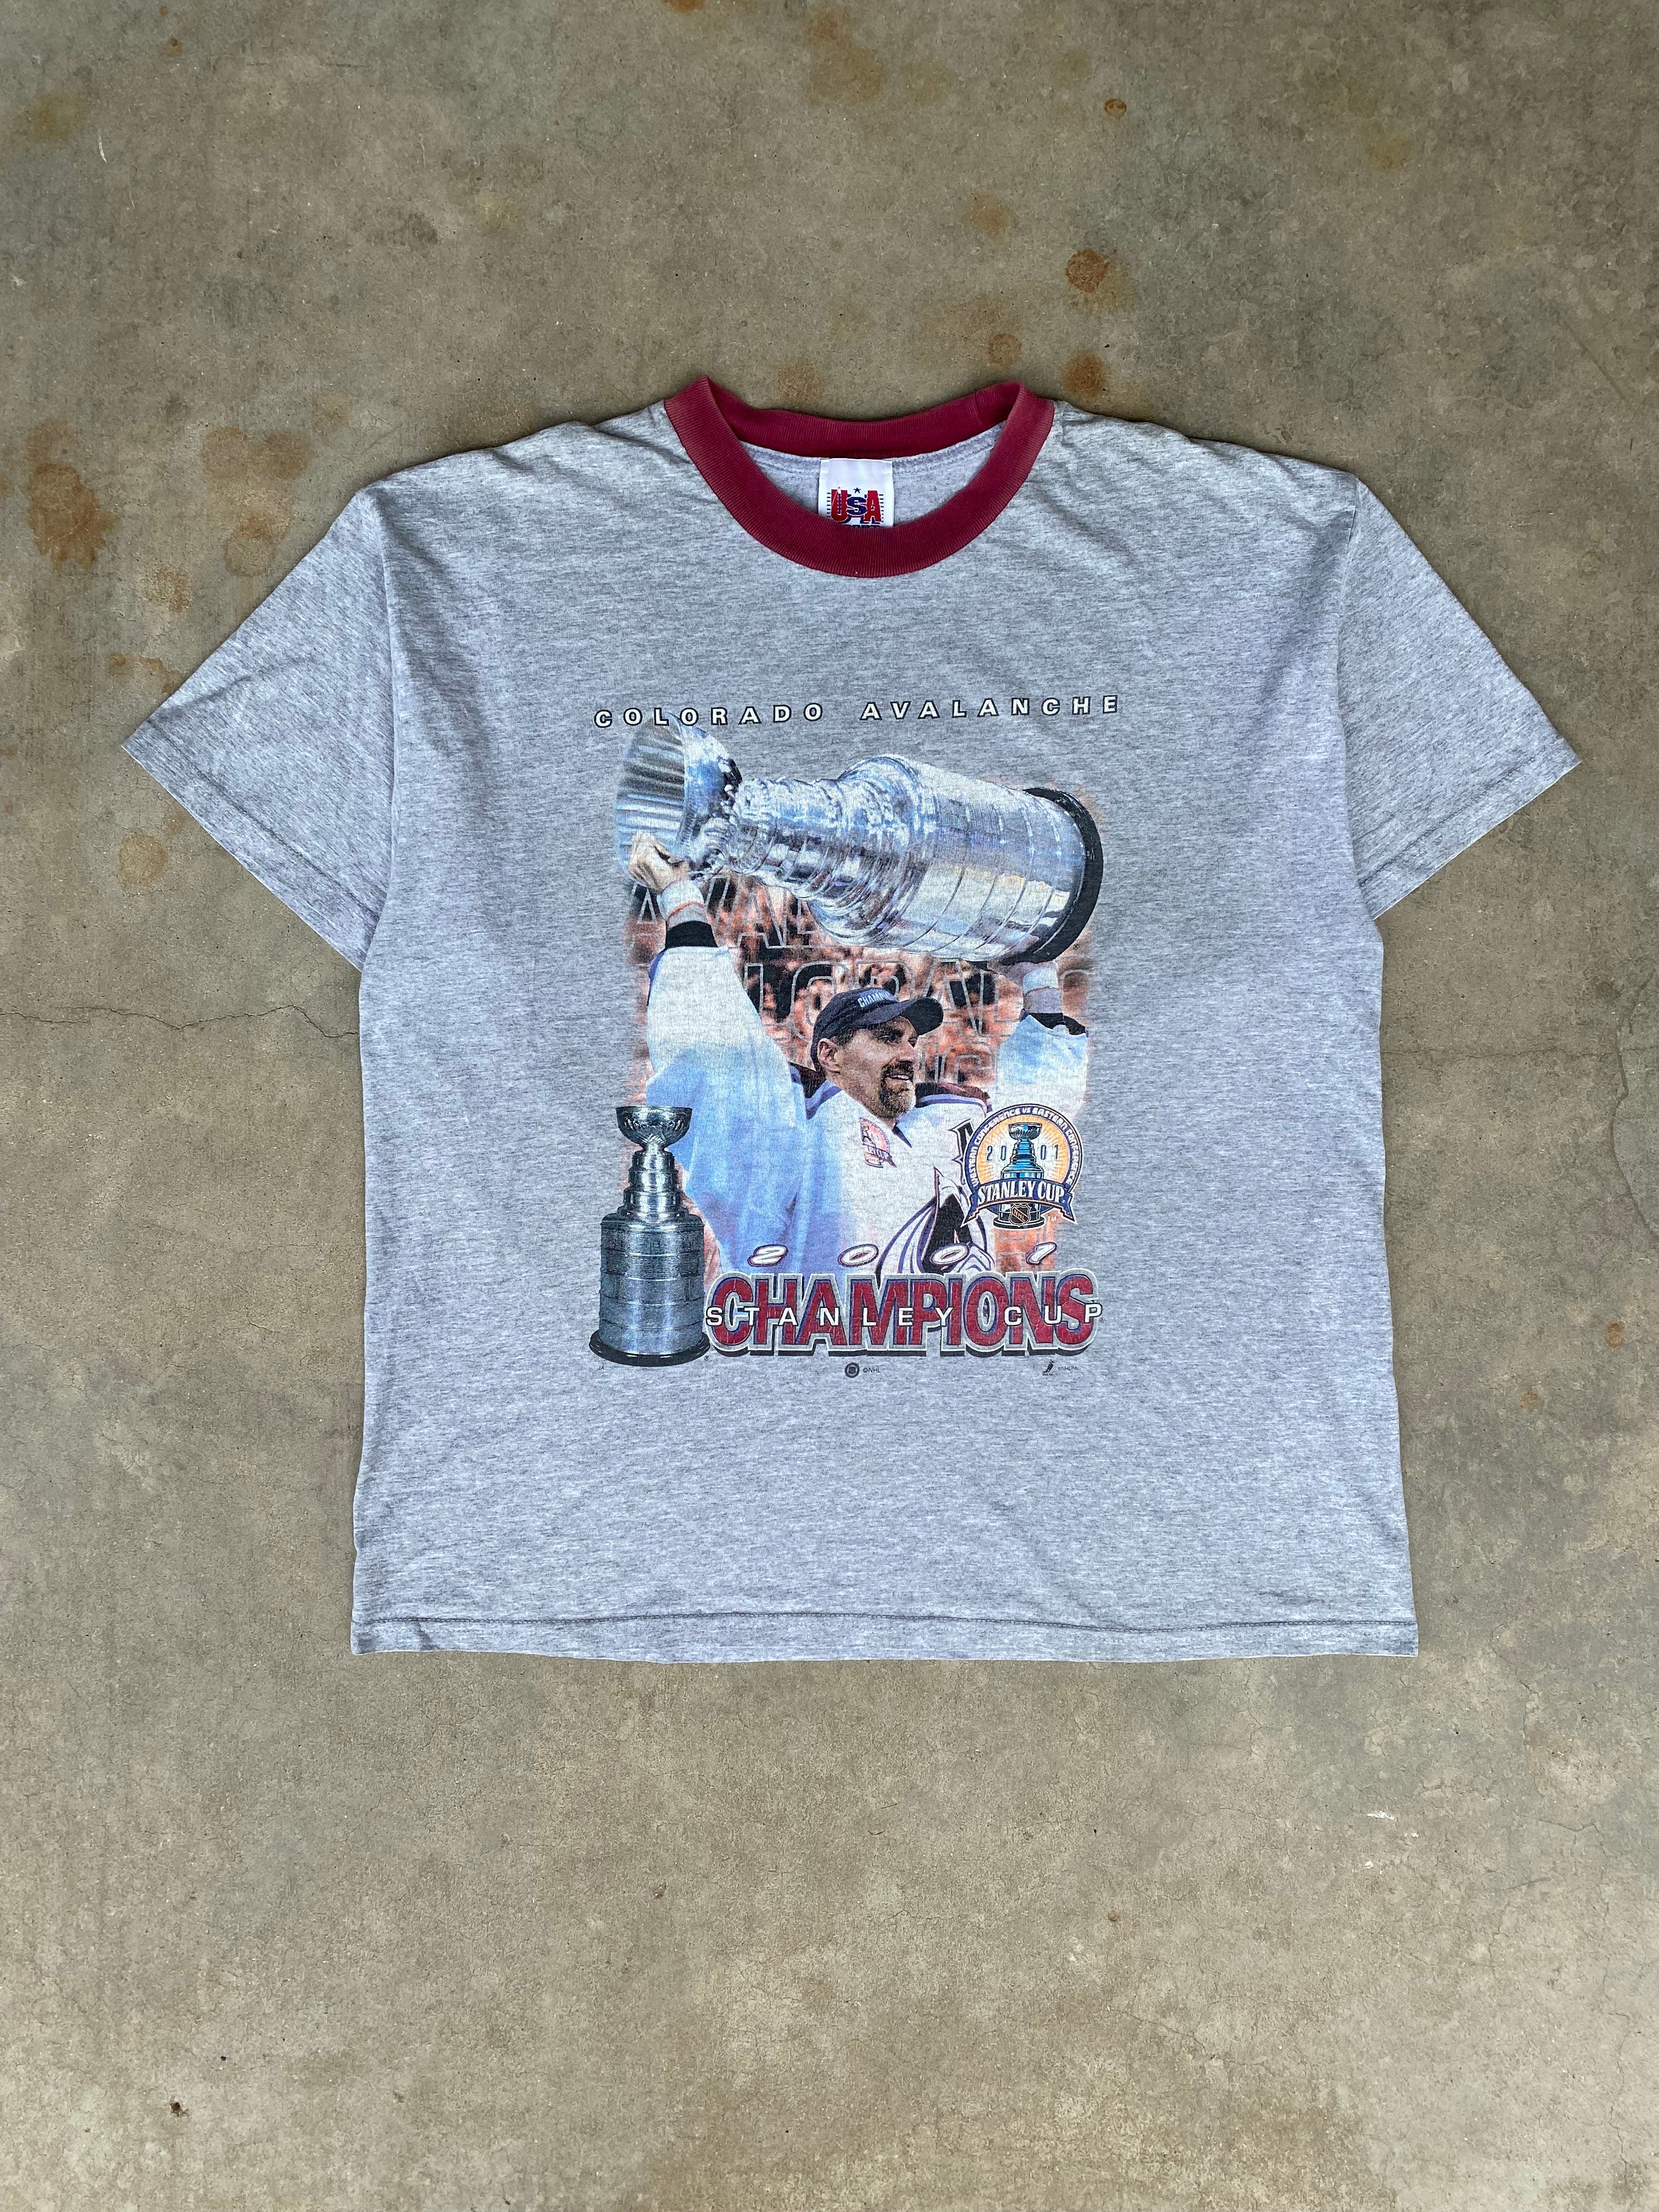 2001 Colorado Avalanche Stanley Cup Champions T-Shirt